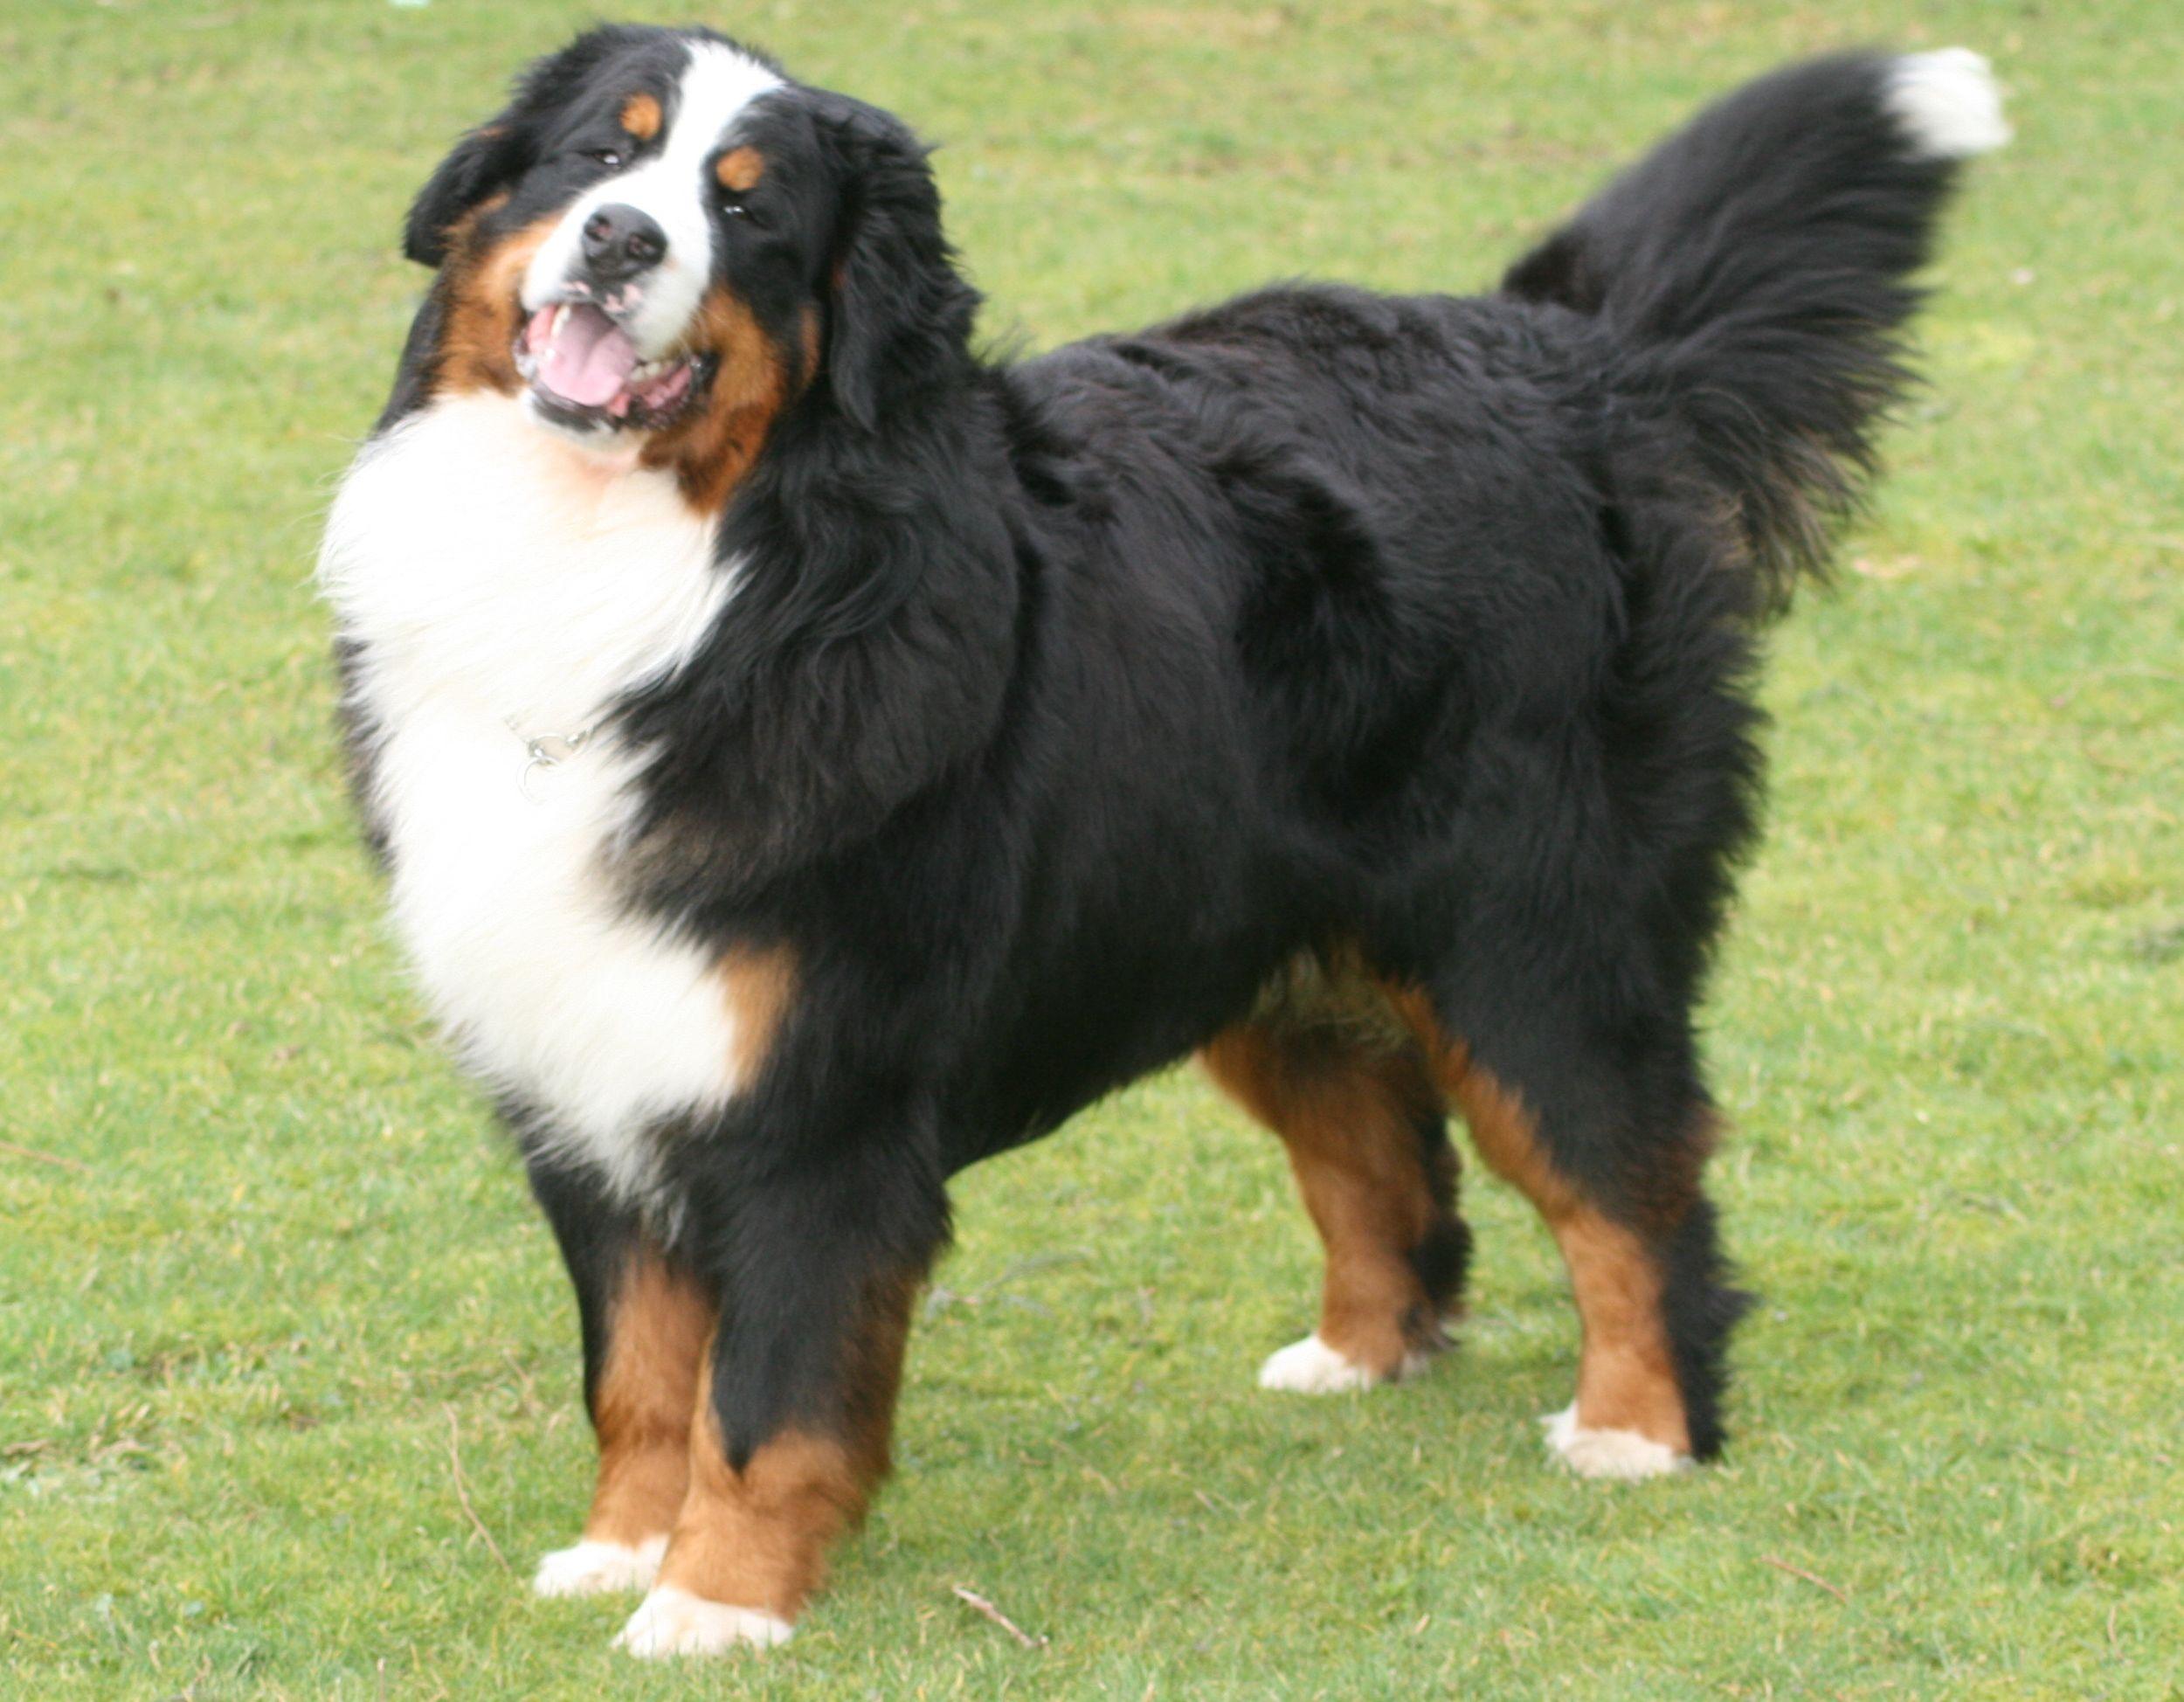 Bernese Mountain Dog Wallpapers - Wallpaper Cave